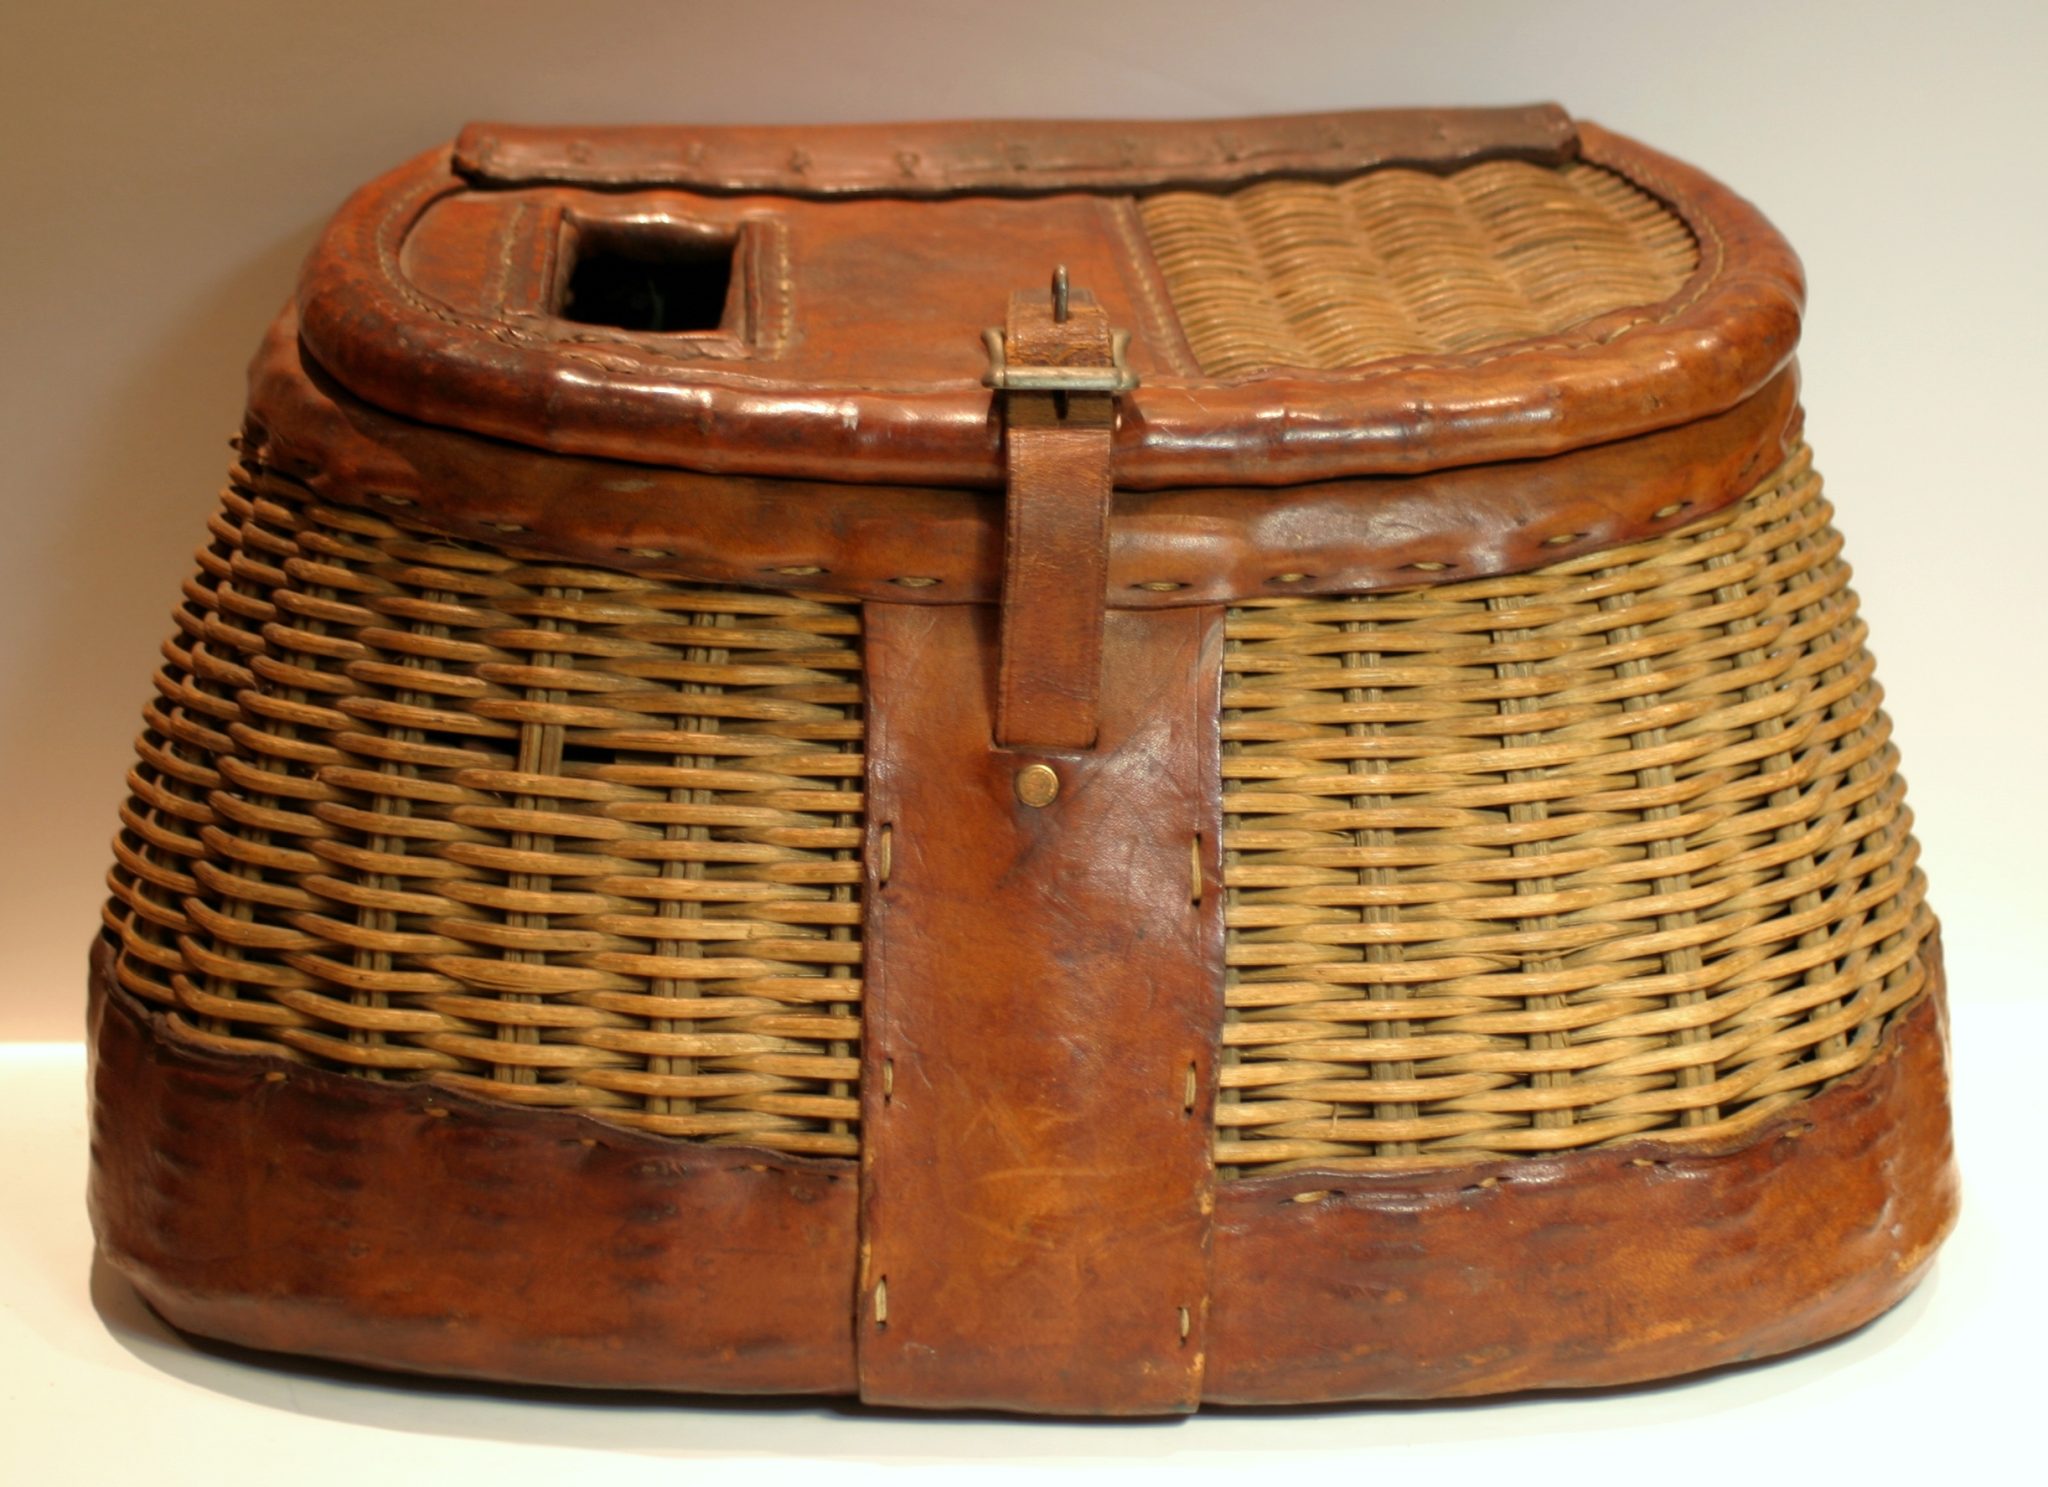 Lot# 109 - Antique Fly Fishing Creel Wicker Basket with Leather